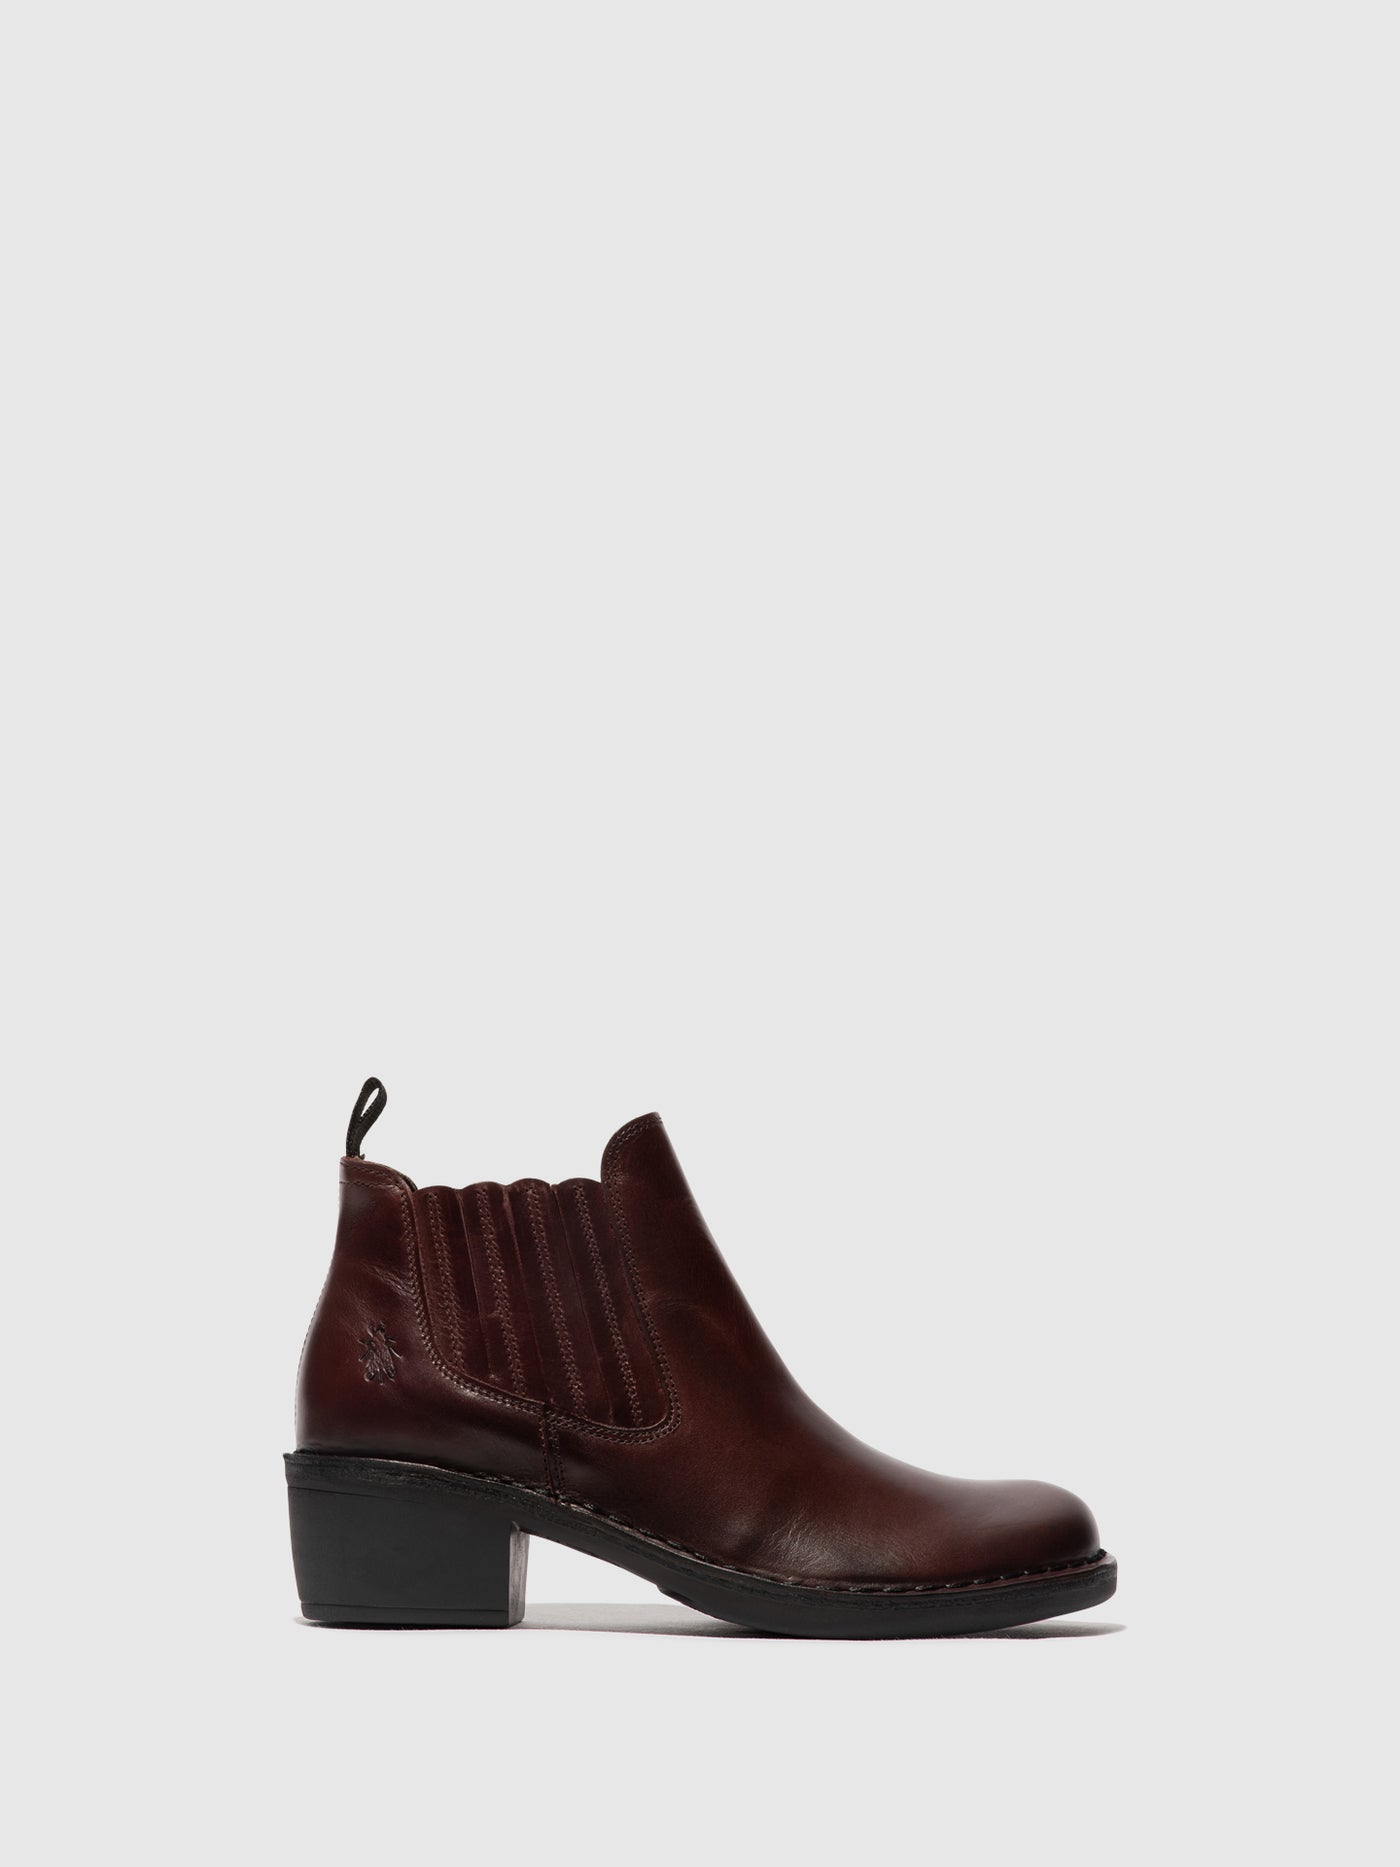 Slip-on Ankle Boots MOOF103FLY WINE